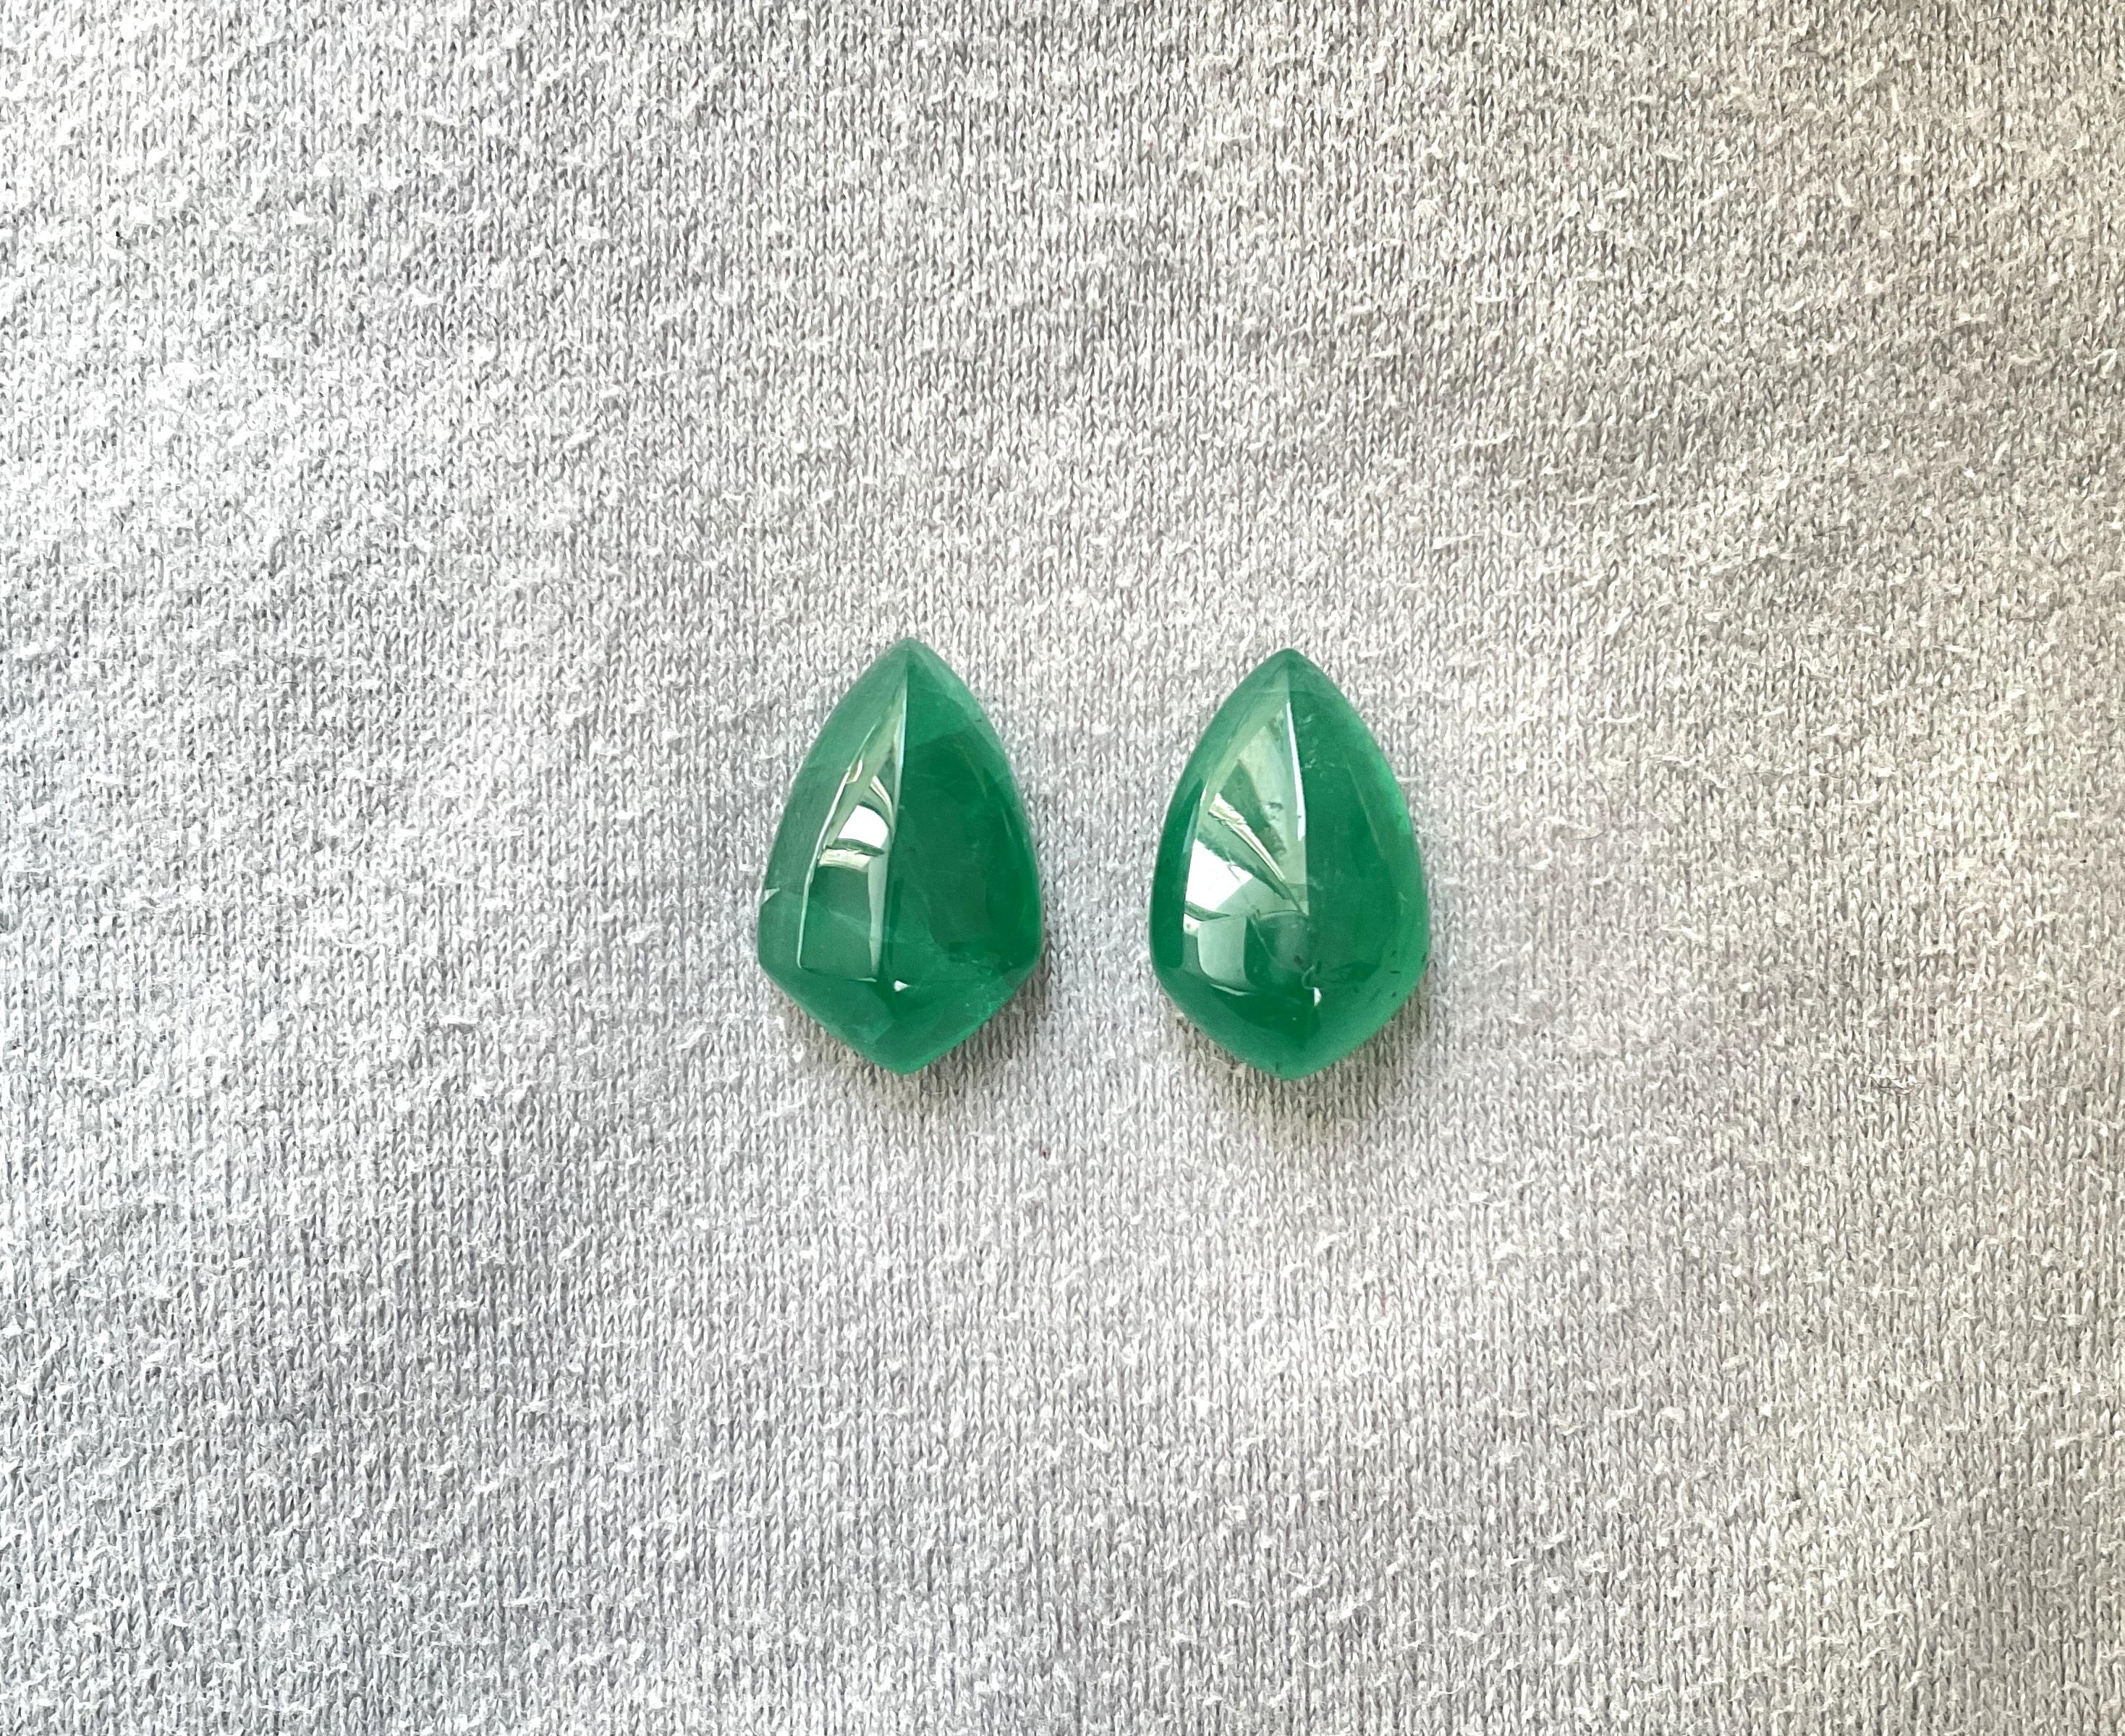 20.71 carats Zambian Emerald Shield Pair cabochon stone for fine Jewelry Natural Gem
Weight: 20.71 Carats
Size: 19x12x8 MM
Pieces: 2
Shape: Shield